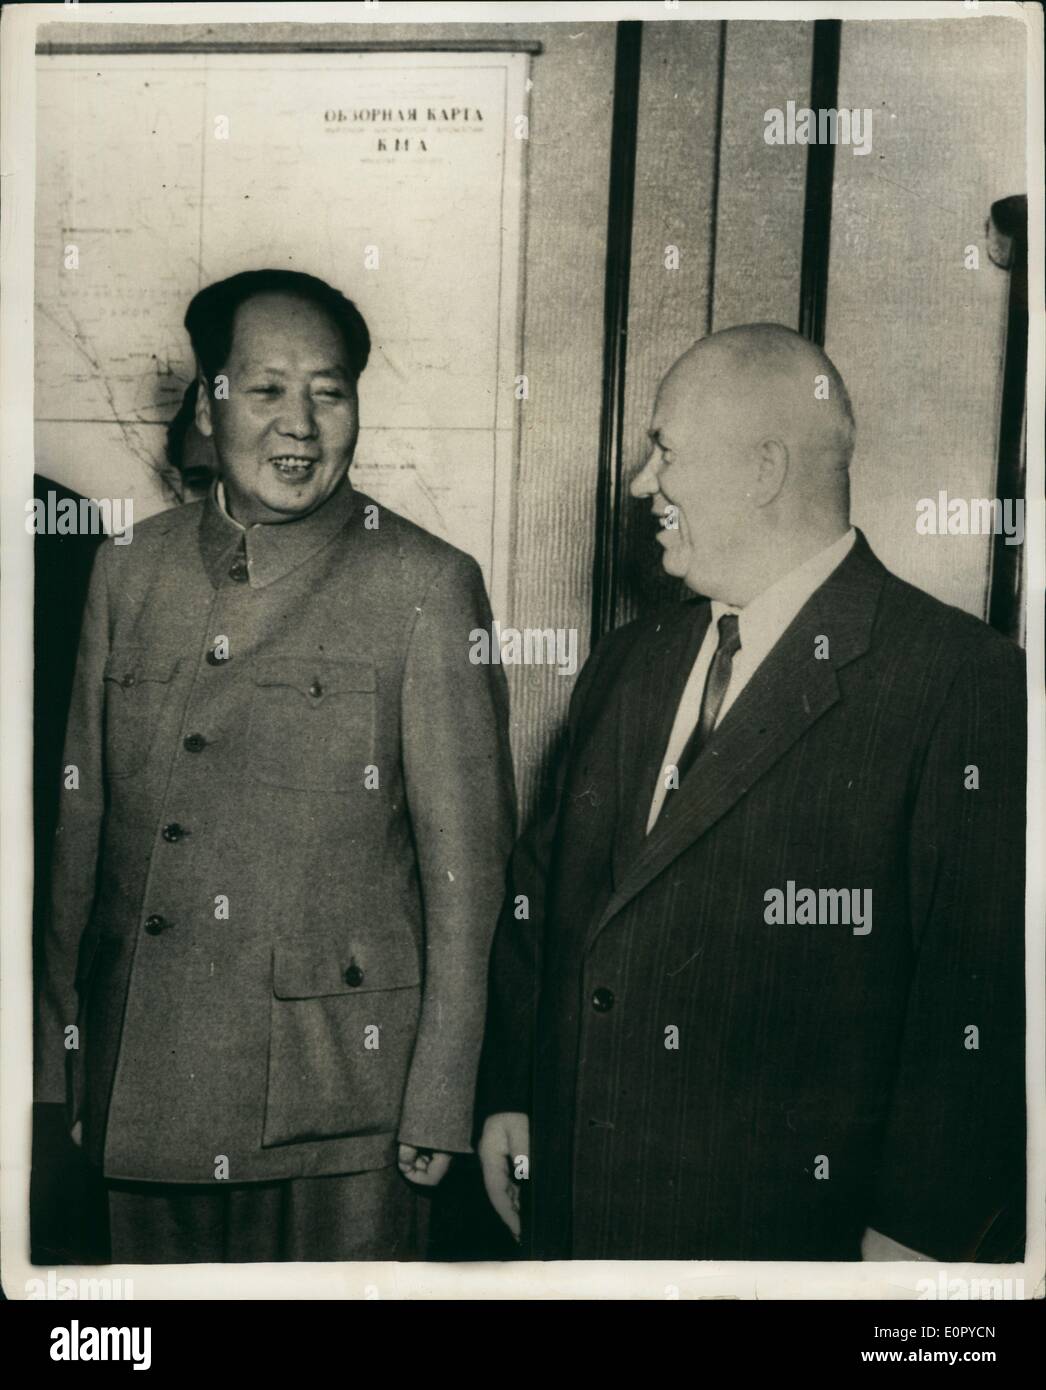 Jul. 07, 1957 - Kruschev and Mao Tse Tung in Moscow: Photo Shows Mao Tse Tung, the Chinese Communist Leader (left), with Mr. Kruschev, seen together during their recent meeting in Moscow. Stock Photo